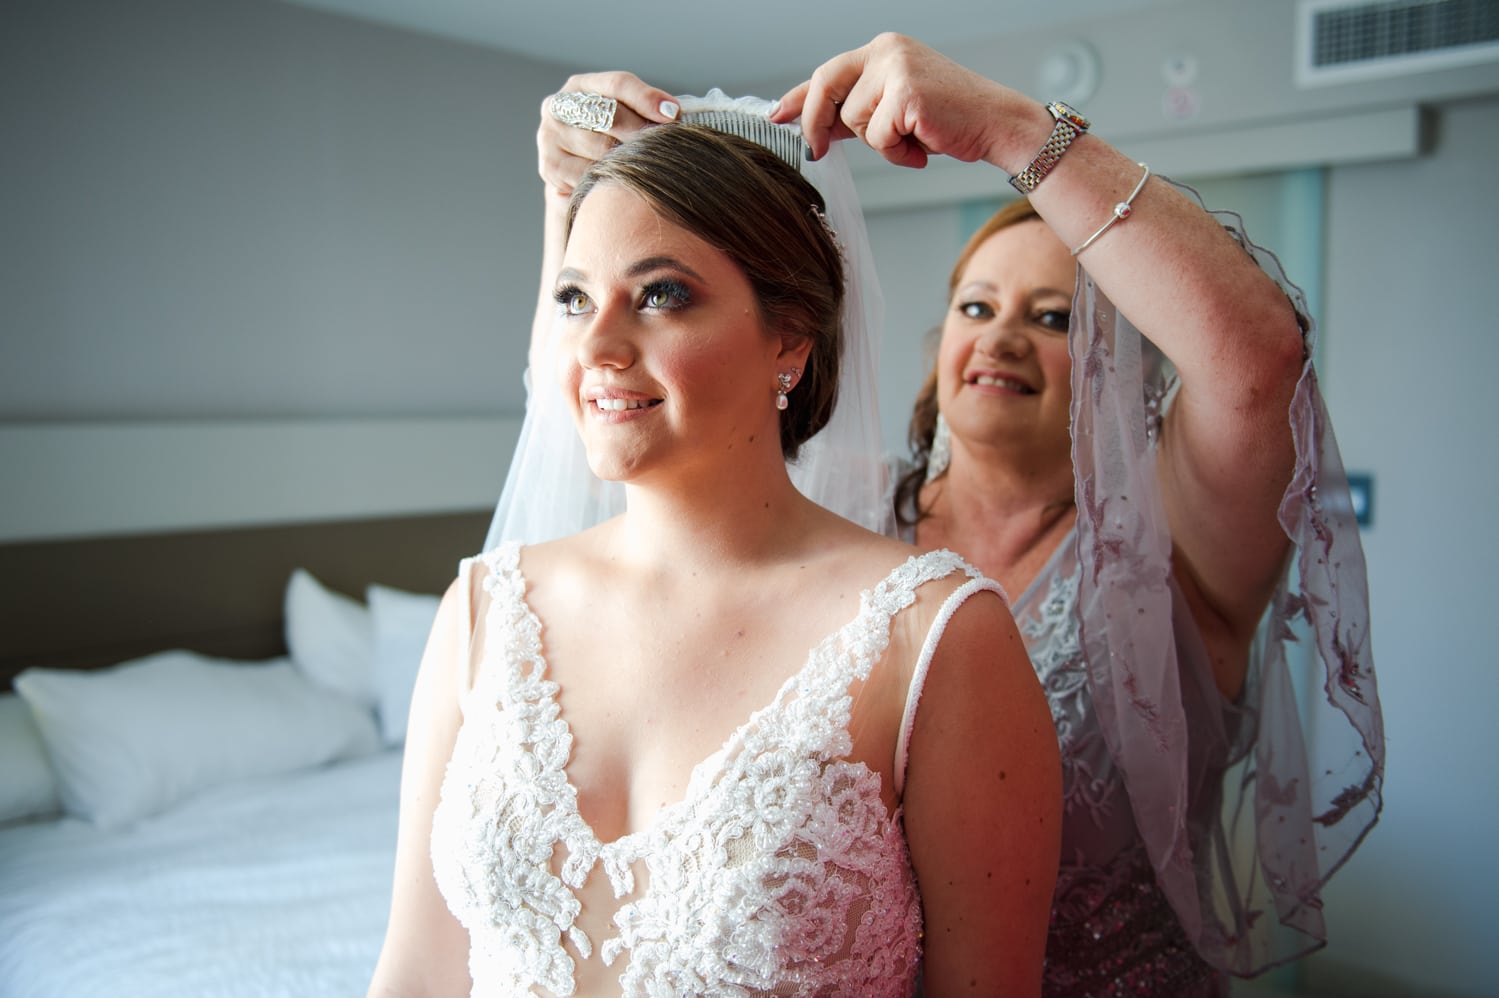 Bridal getting ready at AC Marriott Hotel by Puerto Rico wedding photographer Camille Fontanez